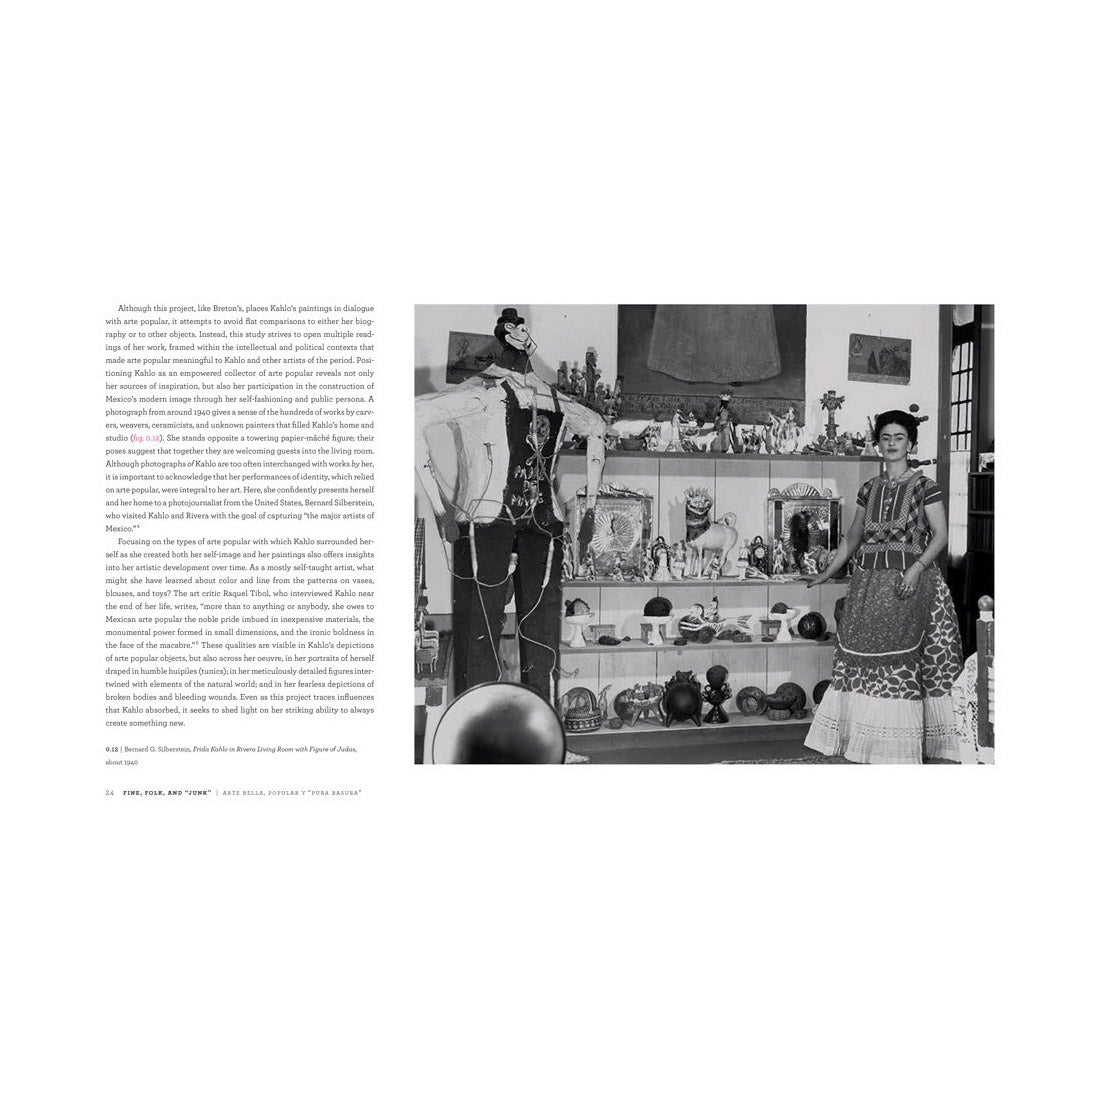 Interior spread of Frida Kahlo and Arte Popular by Layla Bermeo, text and black and white photograph.